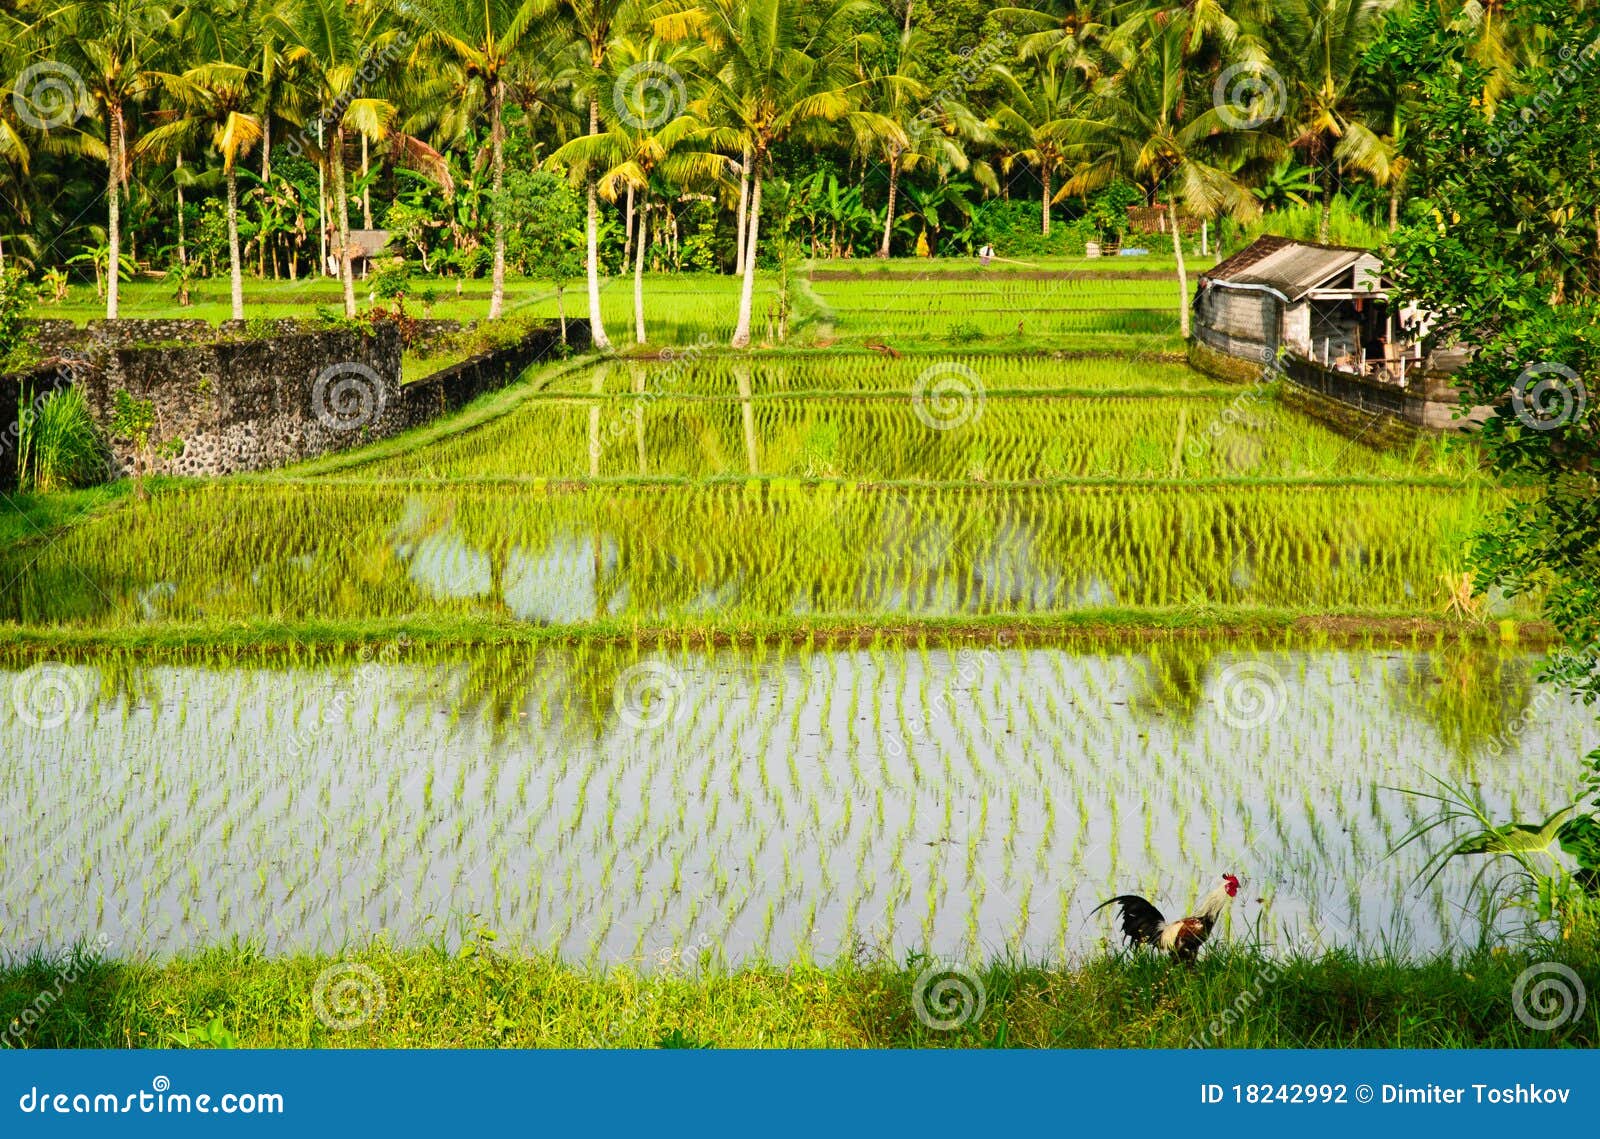 ricefields in bali